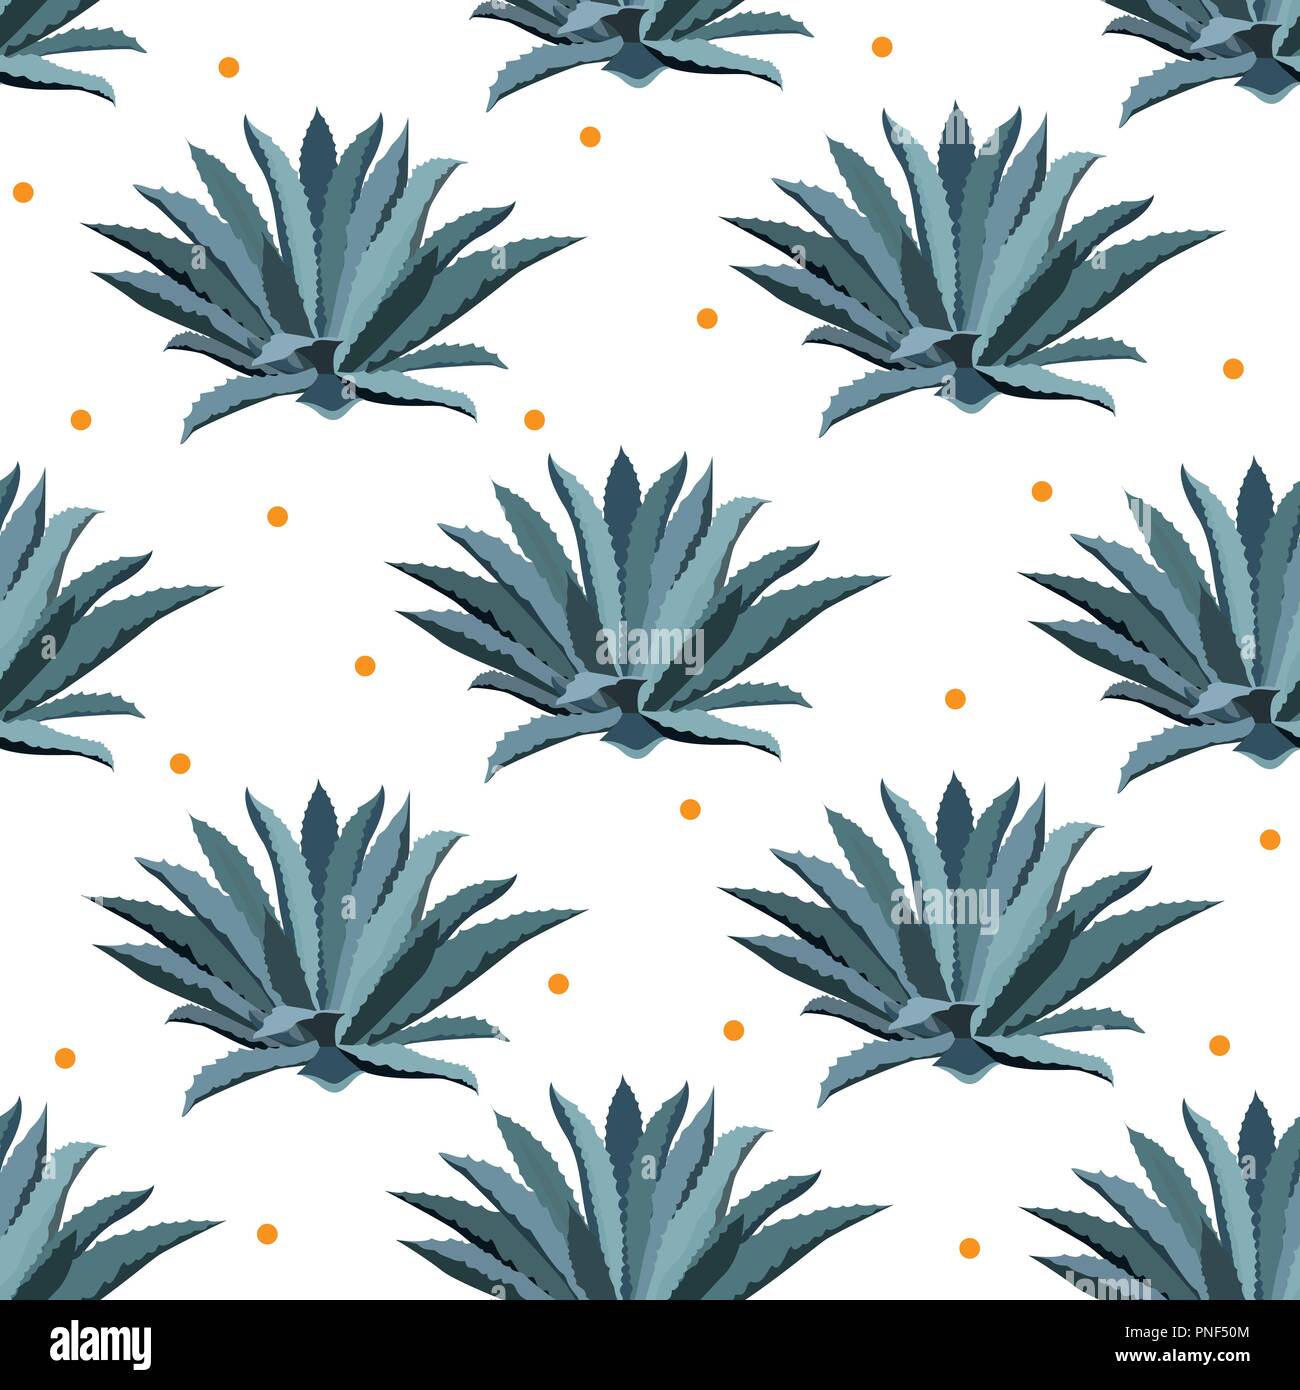 Blue agave vector seamless pattern. Background for tequila packs, superfood with agave syrop, textile, and other. Succulent, cactus wallpapers. Stock Vector